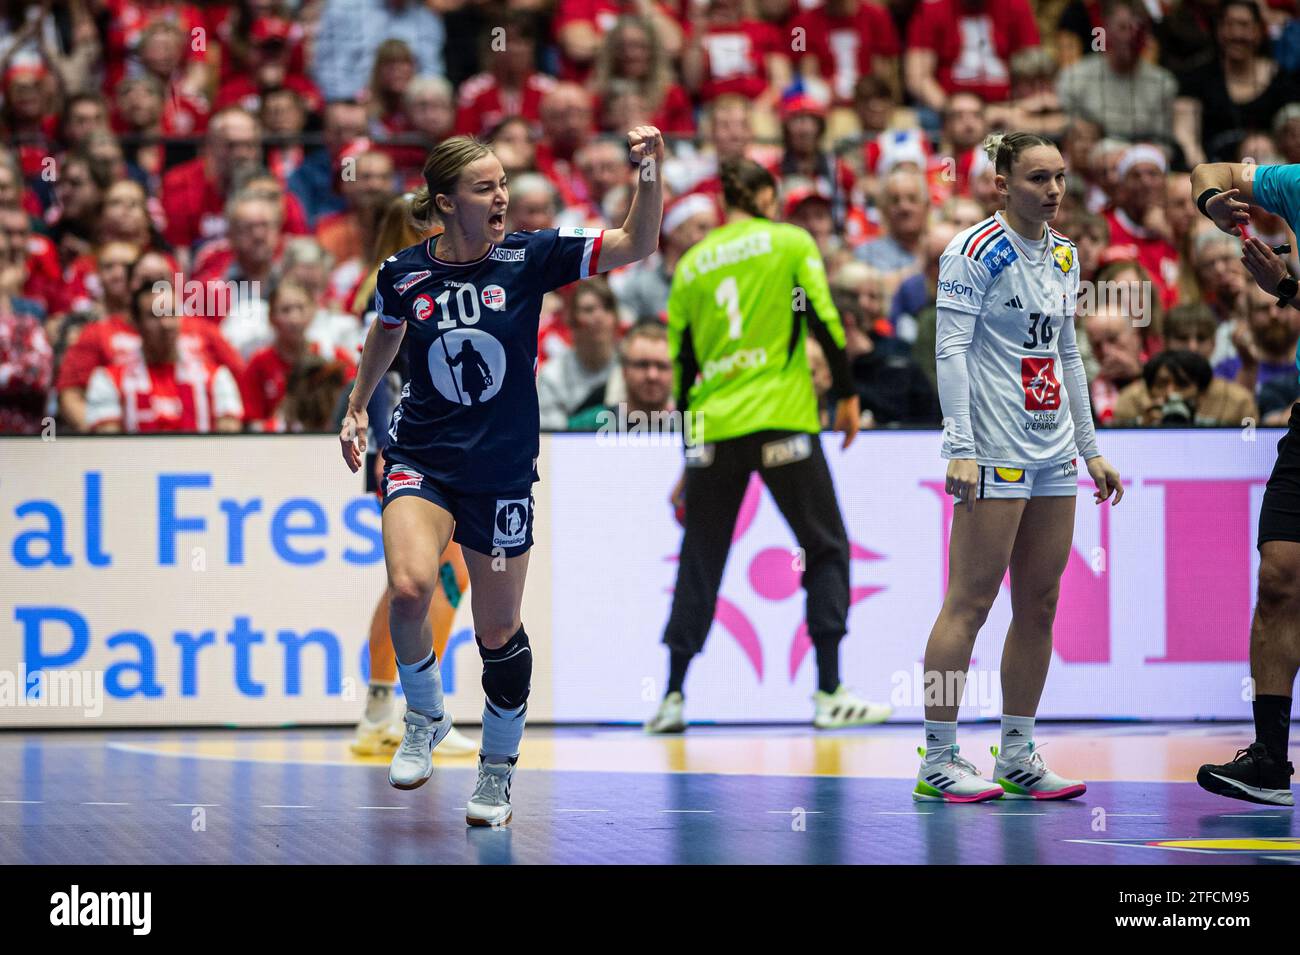 Herning, Denmark. 17th, December 2023. Stine Bredal Oftedal (10) of Norway seen during the IHF World Handball Championship 2023 final between France and Norway at Jyske Bank Boxen in Herning. (Photo credit: Gonzales Photo - Morten Kjær). Stock Photo